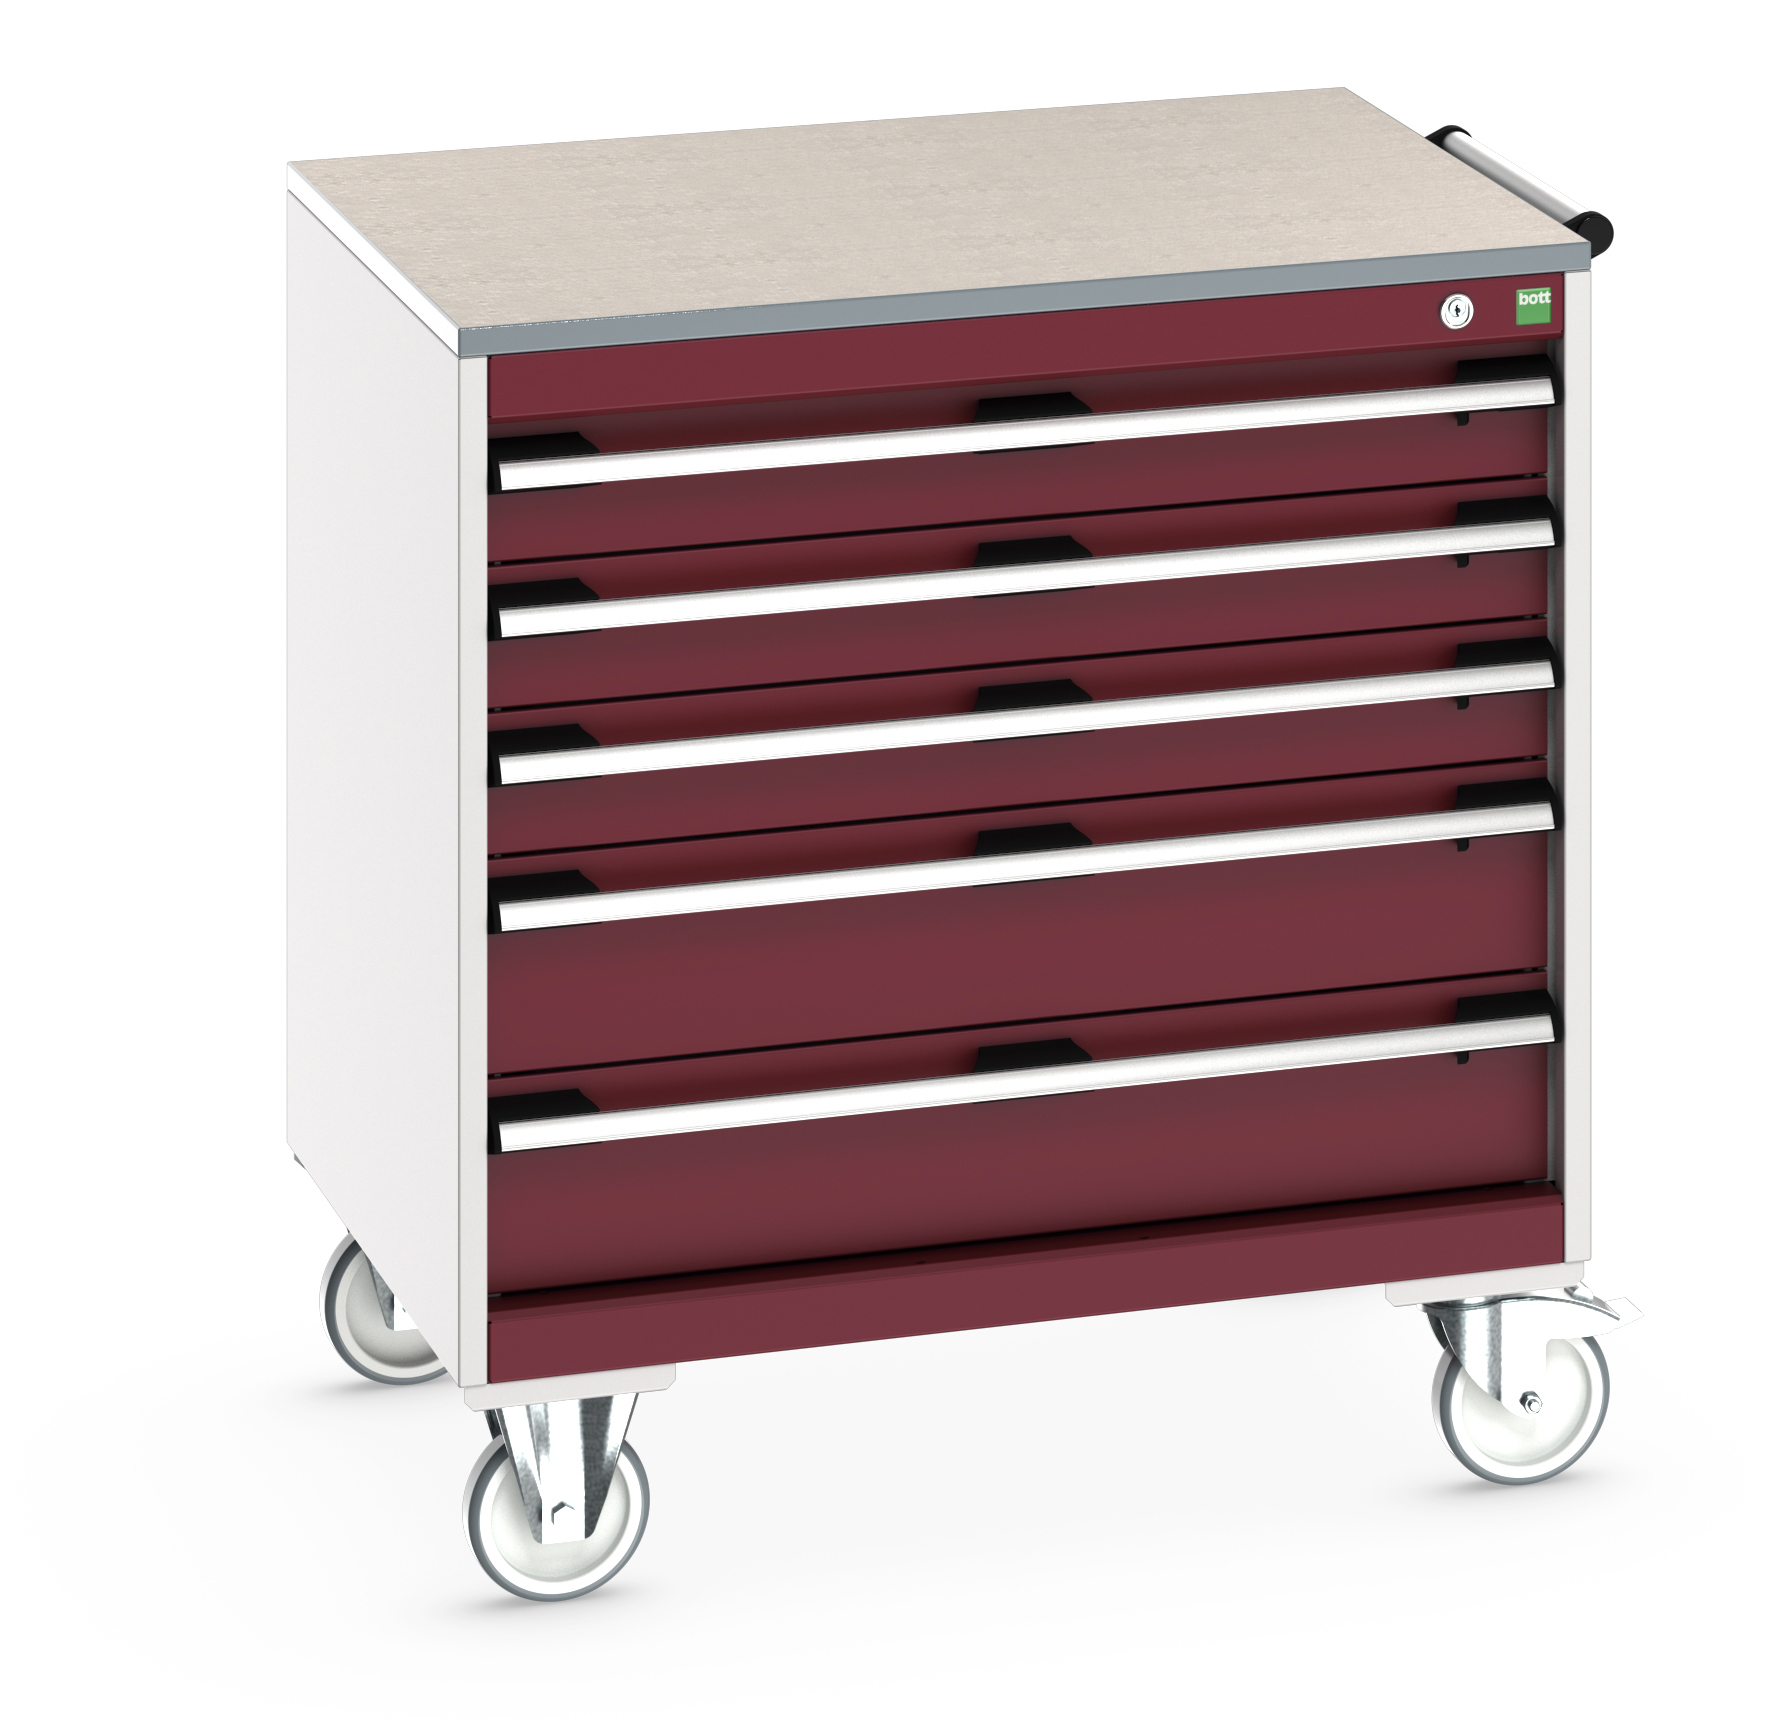 Bott Cubio Mobile Drawer Cabinet With 5 Drawers & Lino Worktop - 40402156.24V